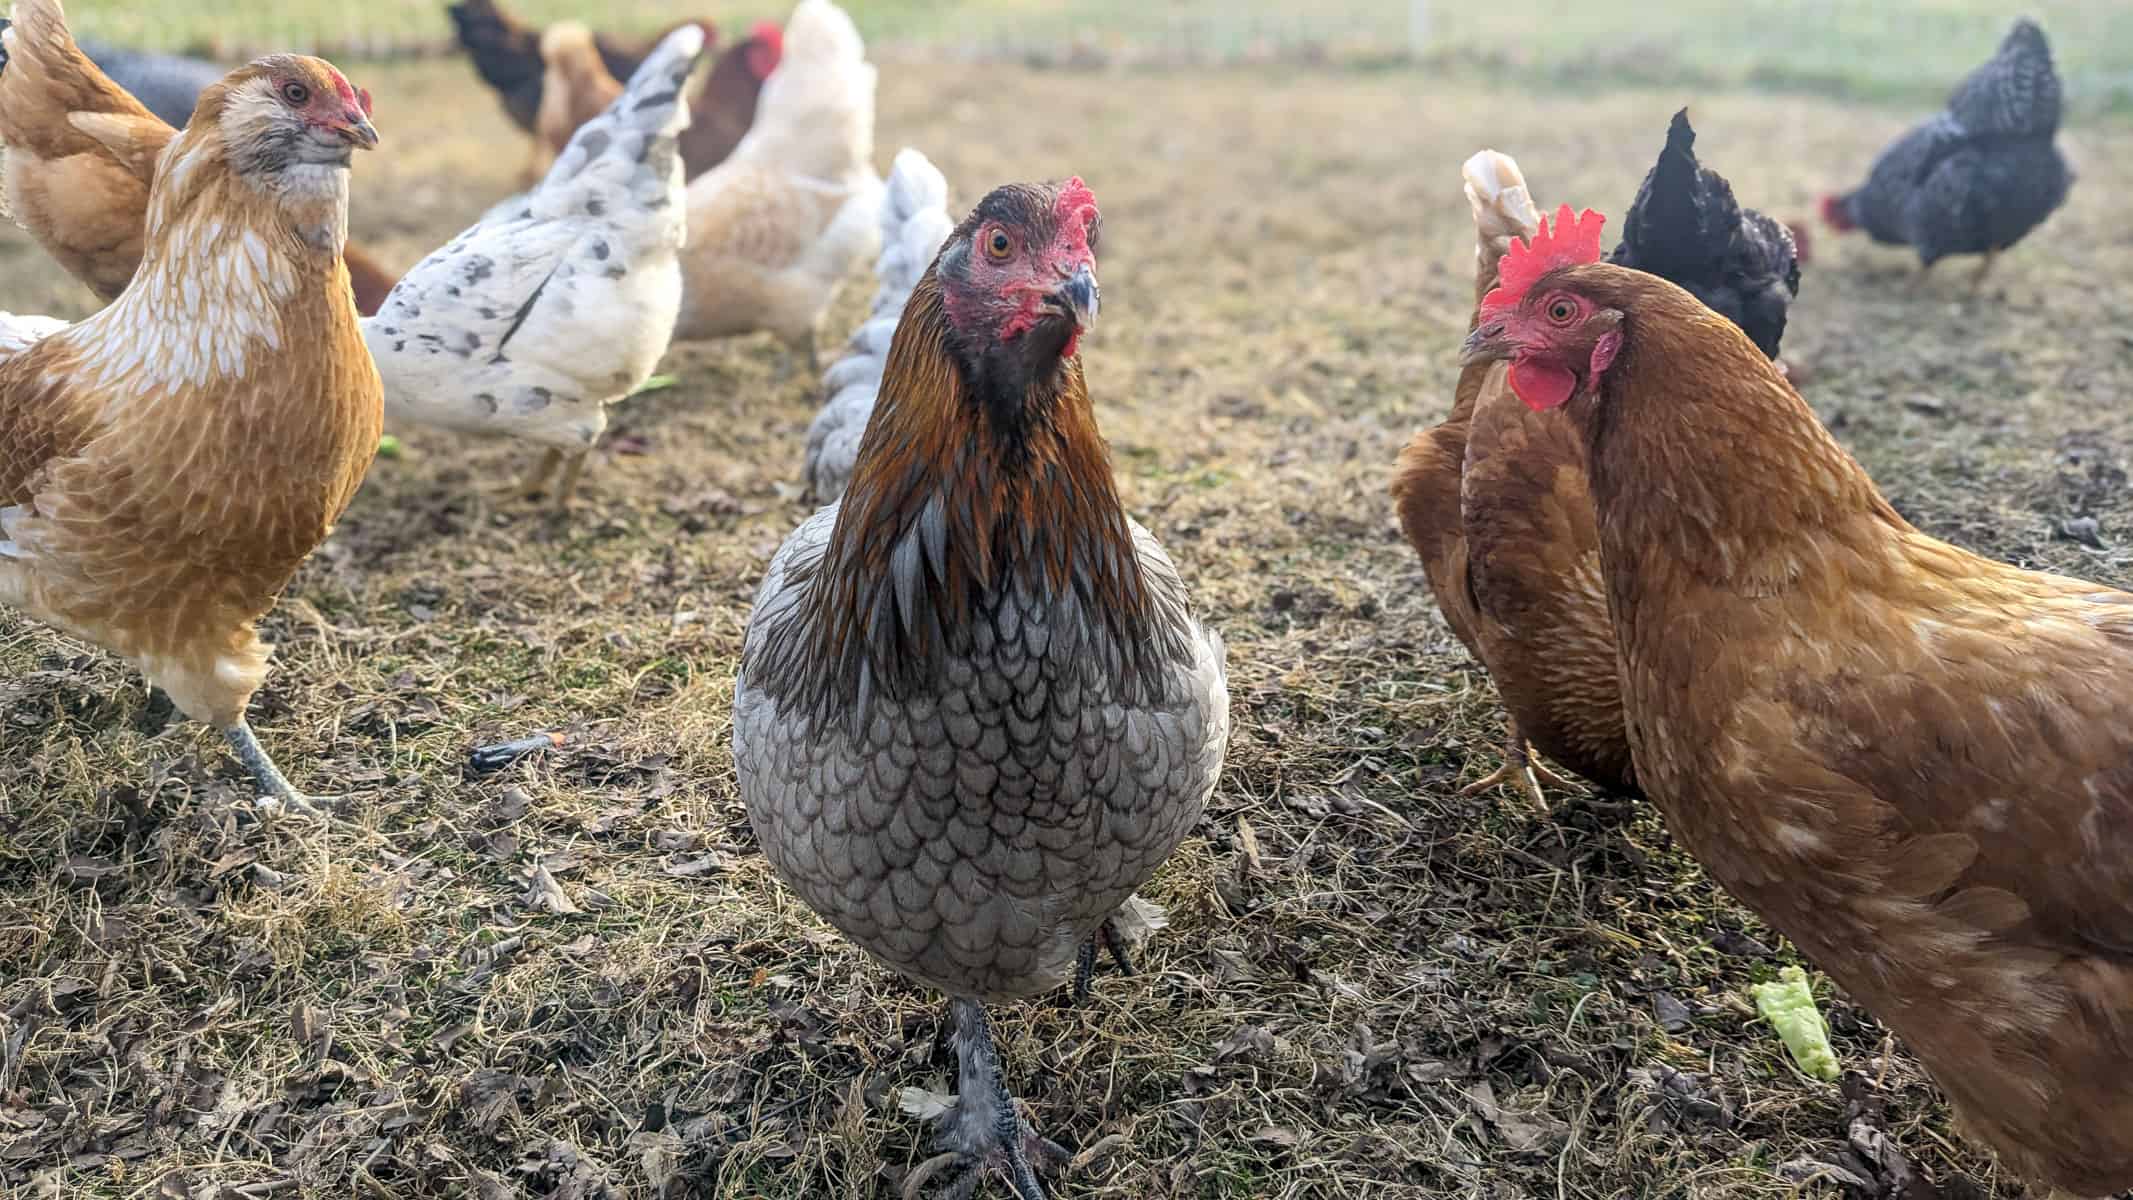 photo of olive egger chicken front and center on winter grass surrounded by other cold breed chickens